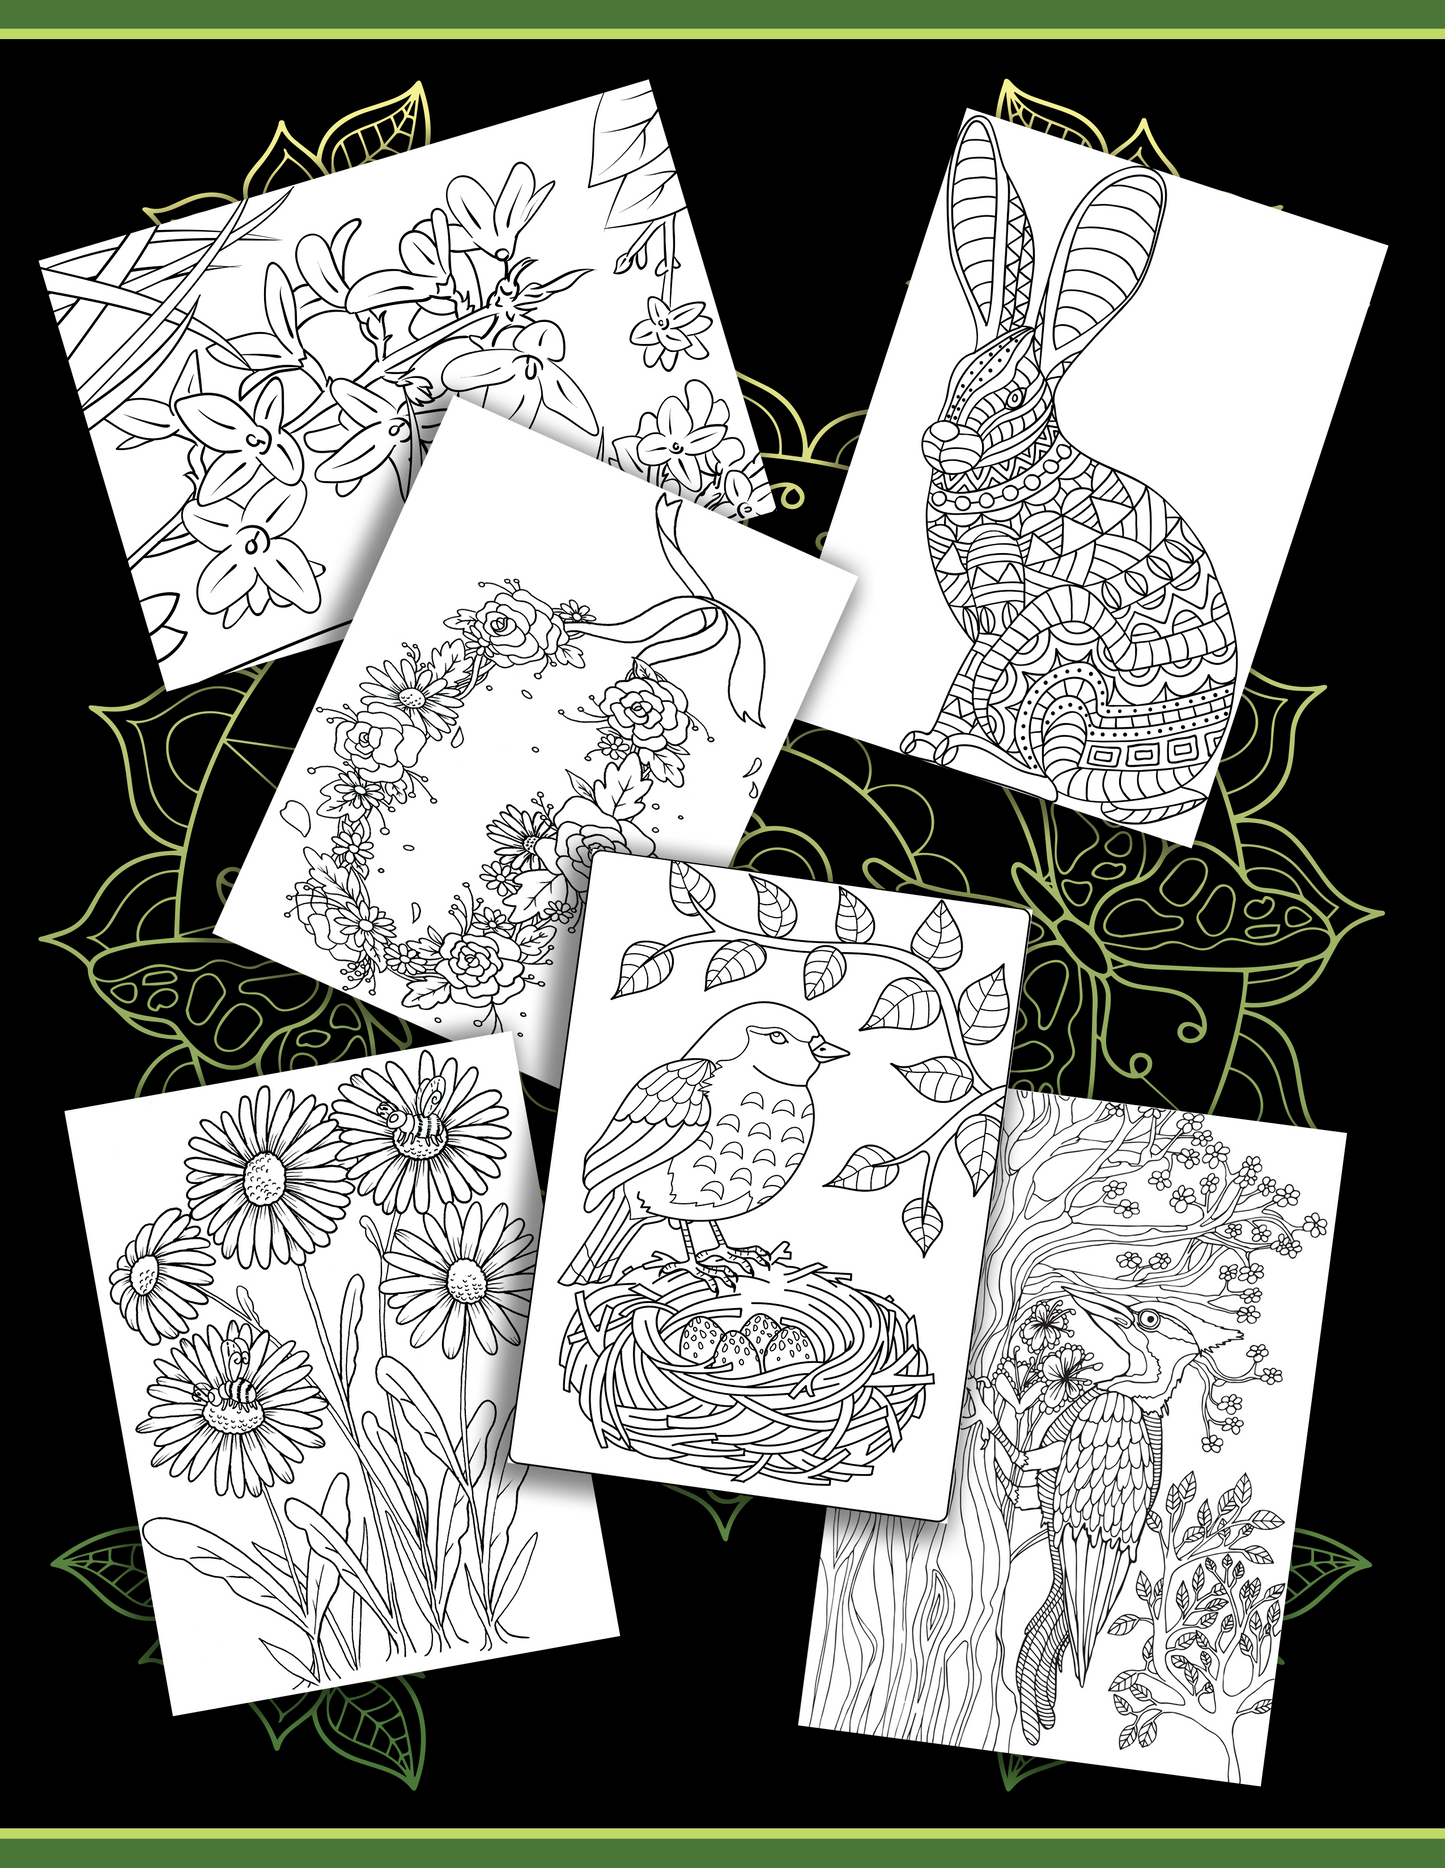 Adult Coloring Book: 30 Spring Blooms Coloring Pages